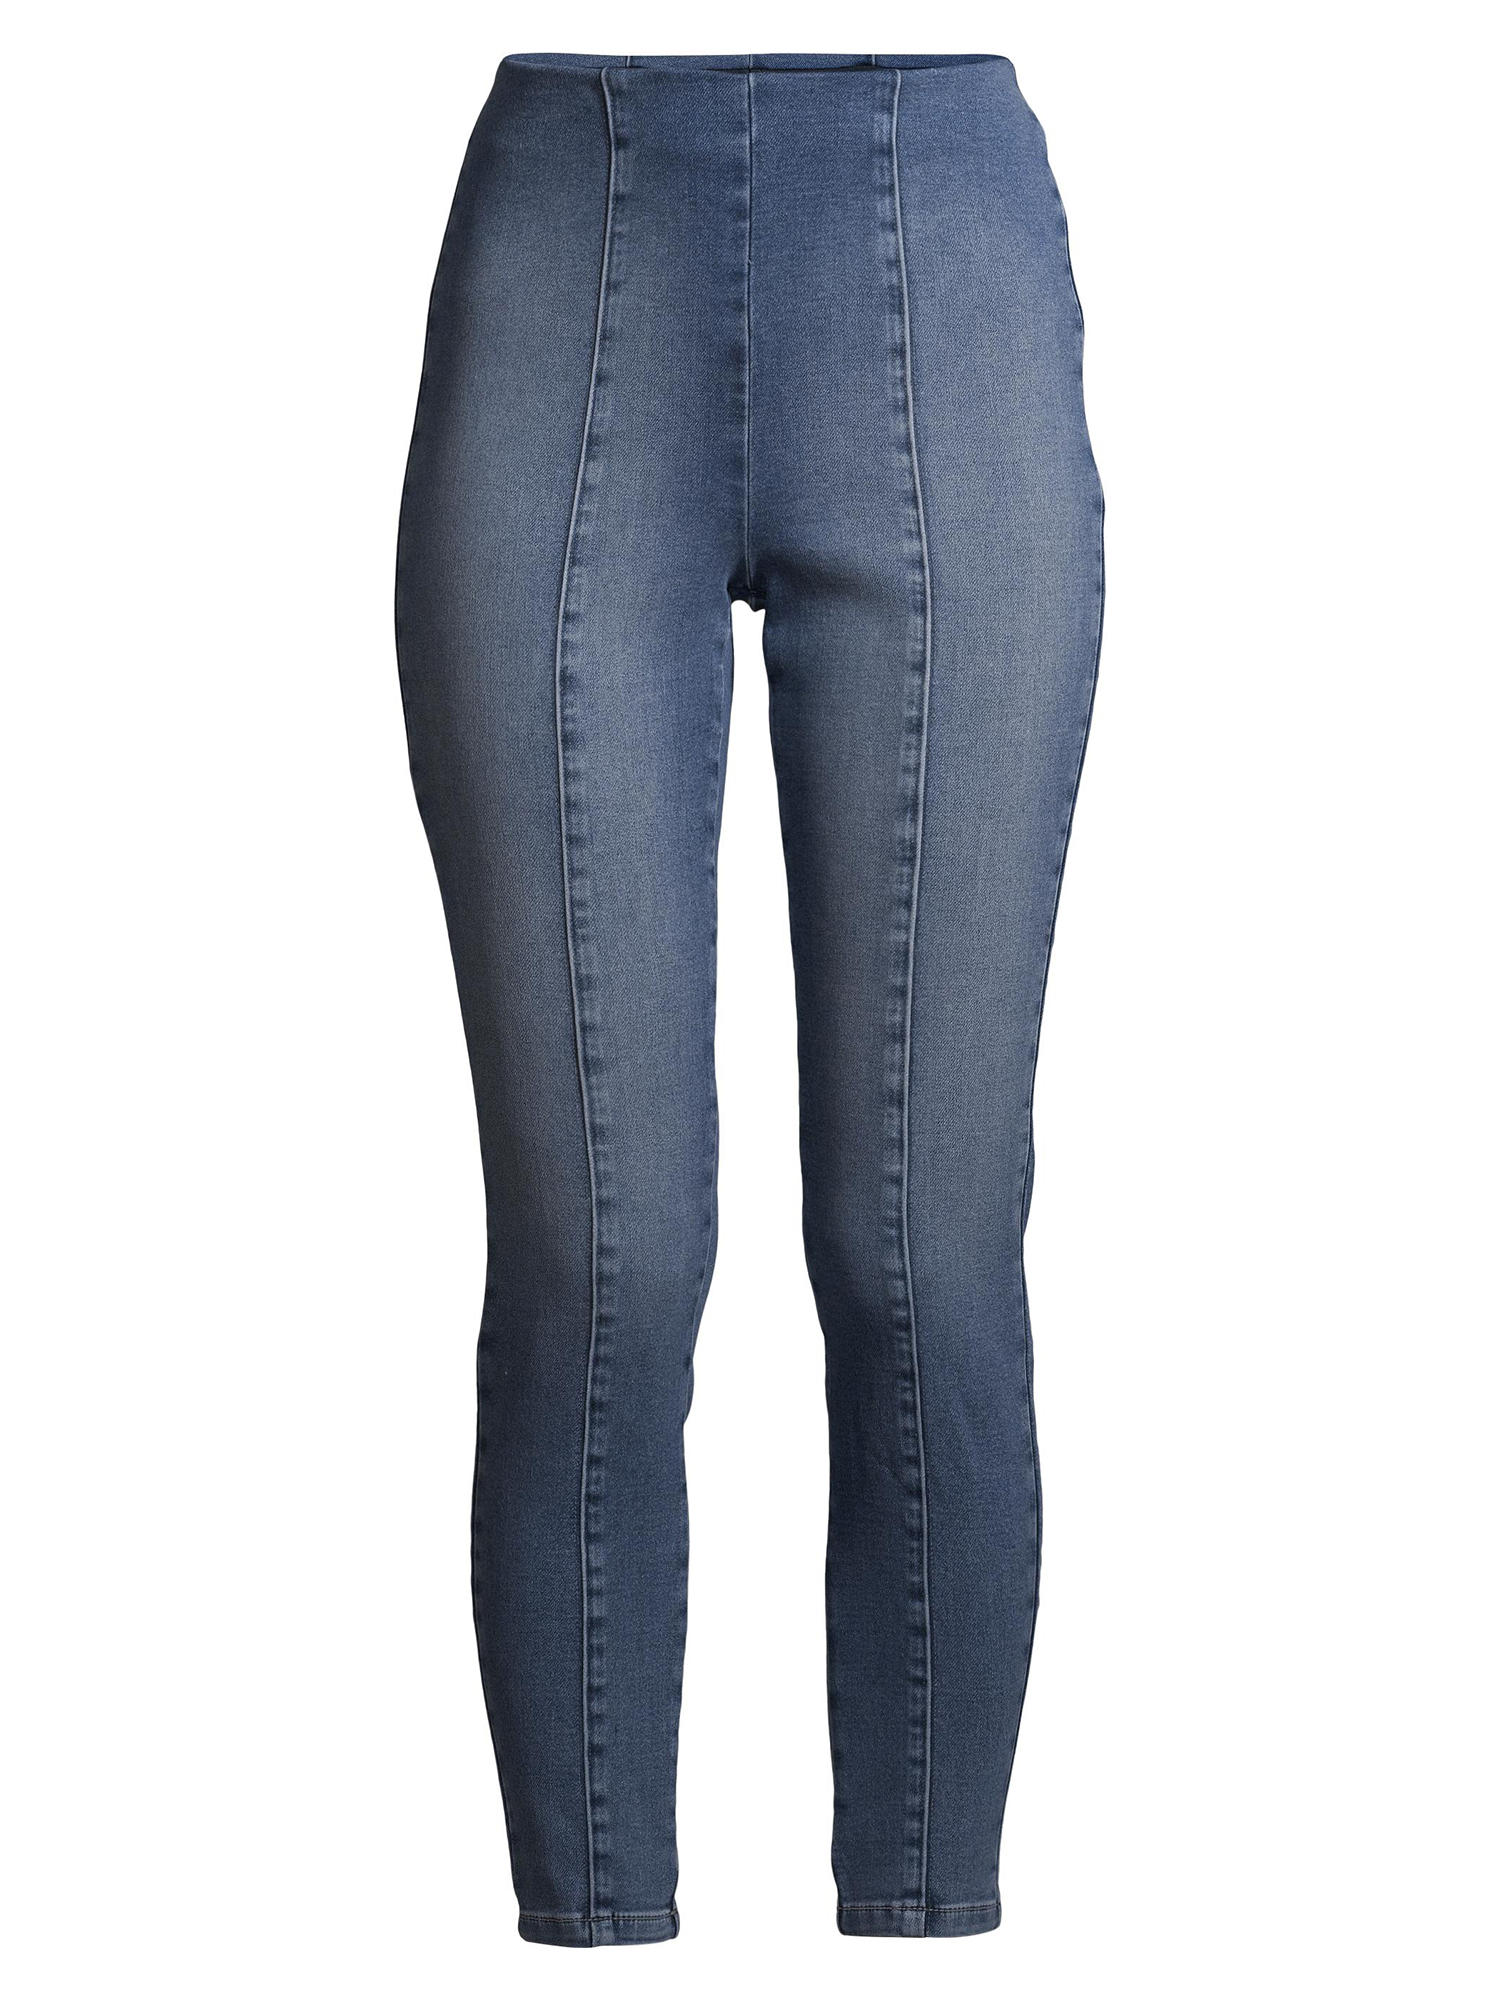 Time and Tru Women's Pull On Seamed Front Skinny Jeans - image 4 of 6